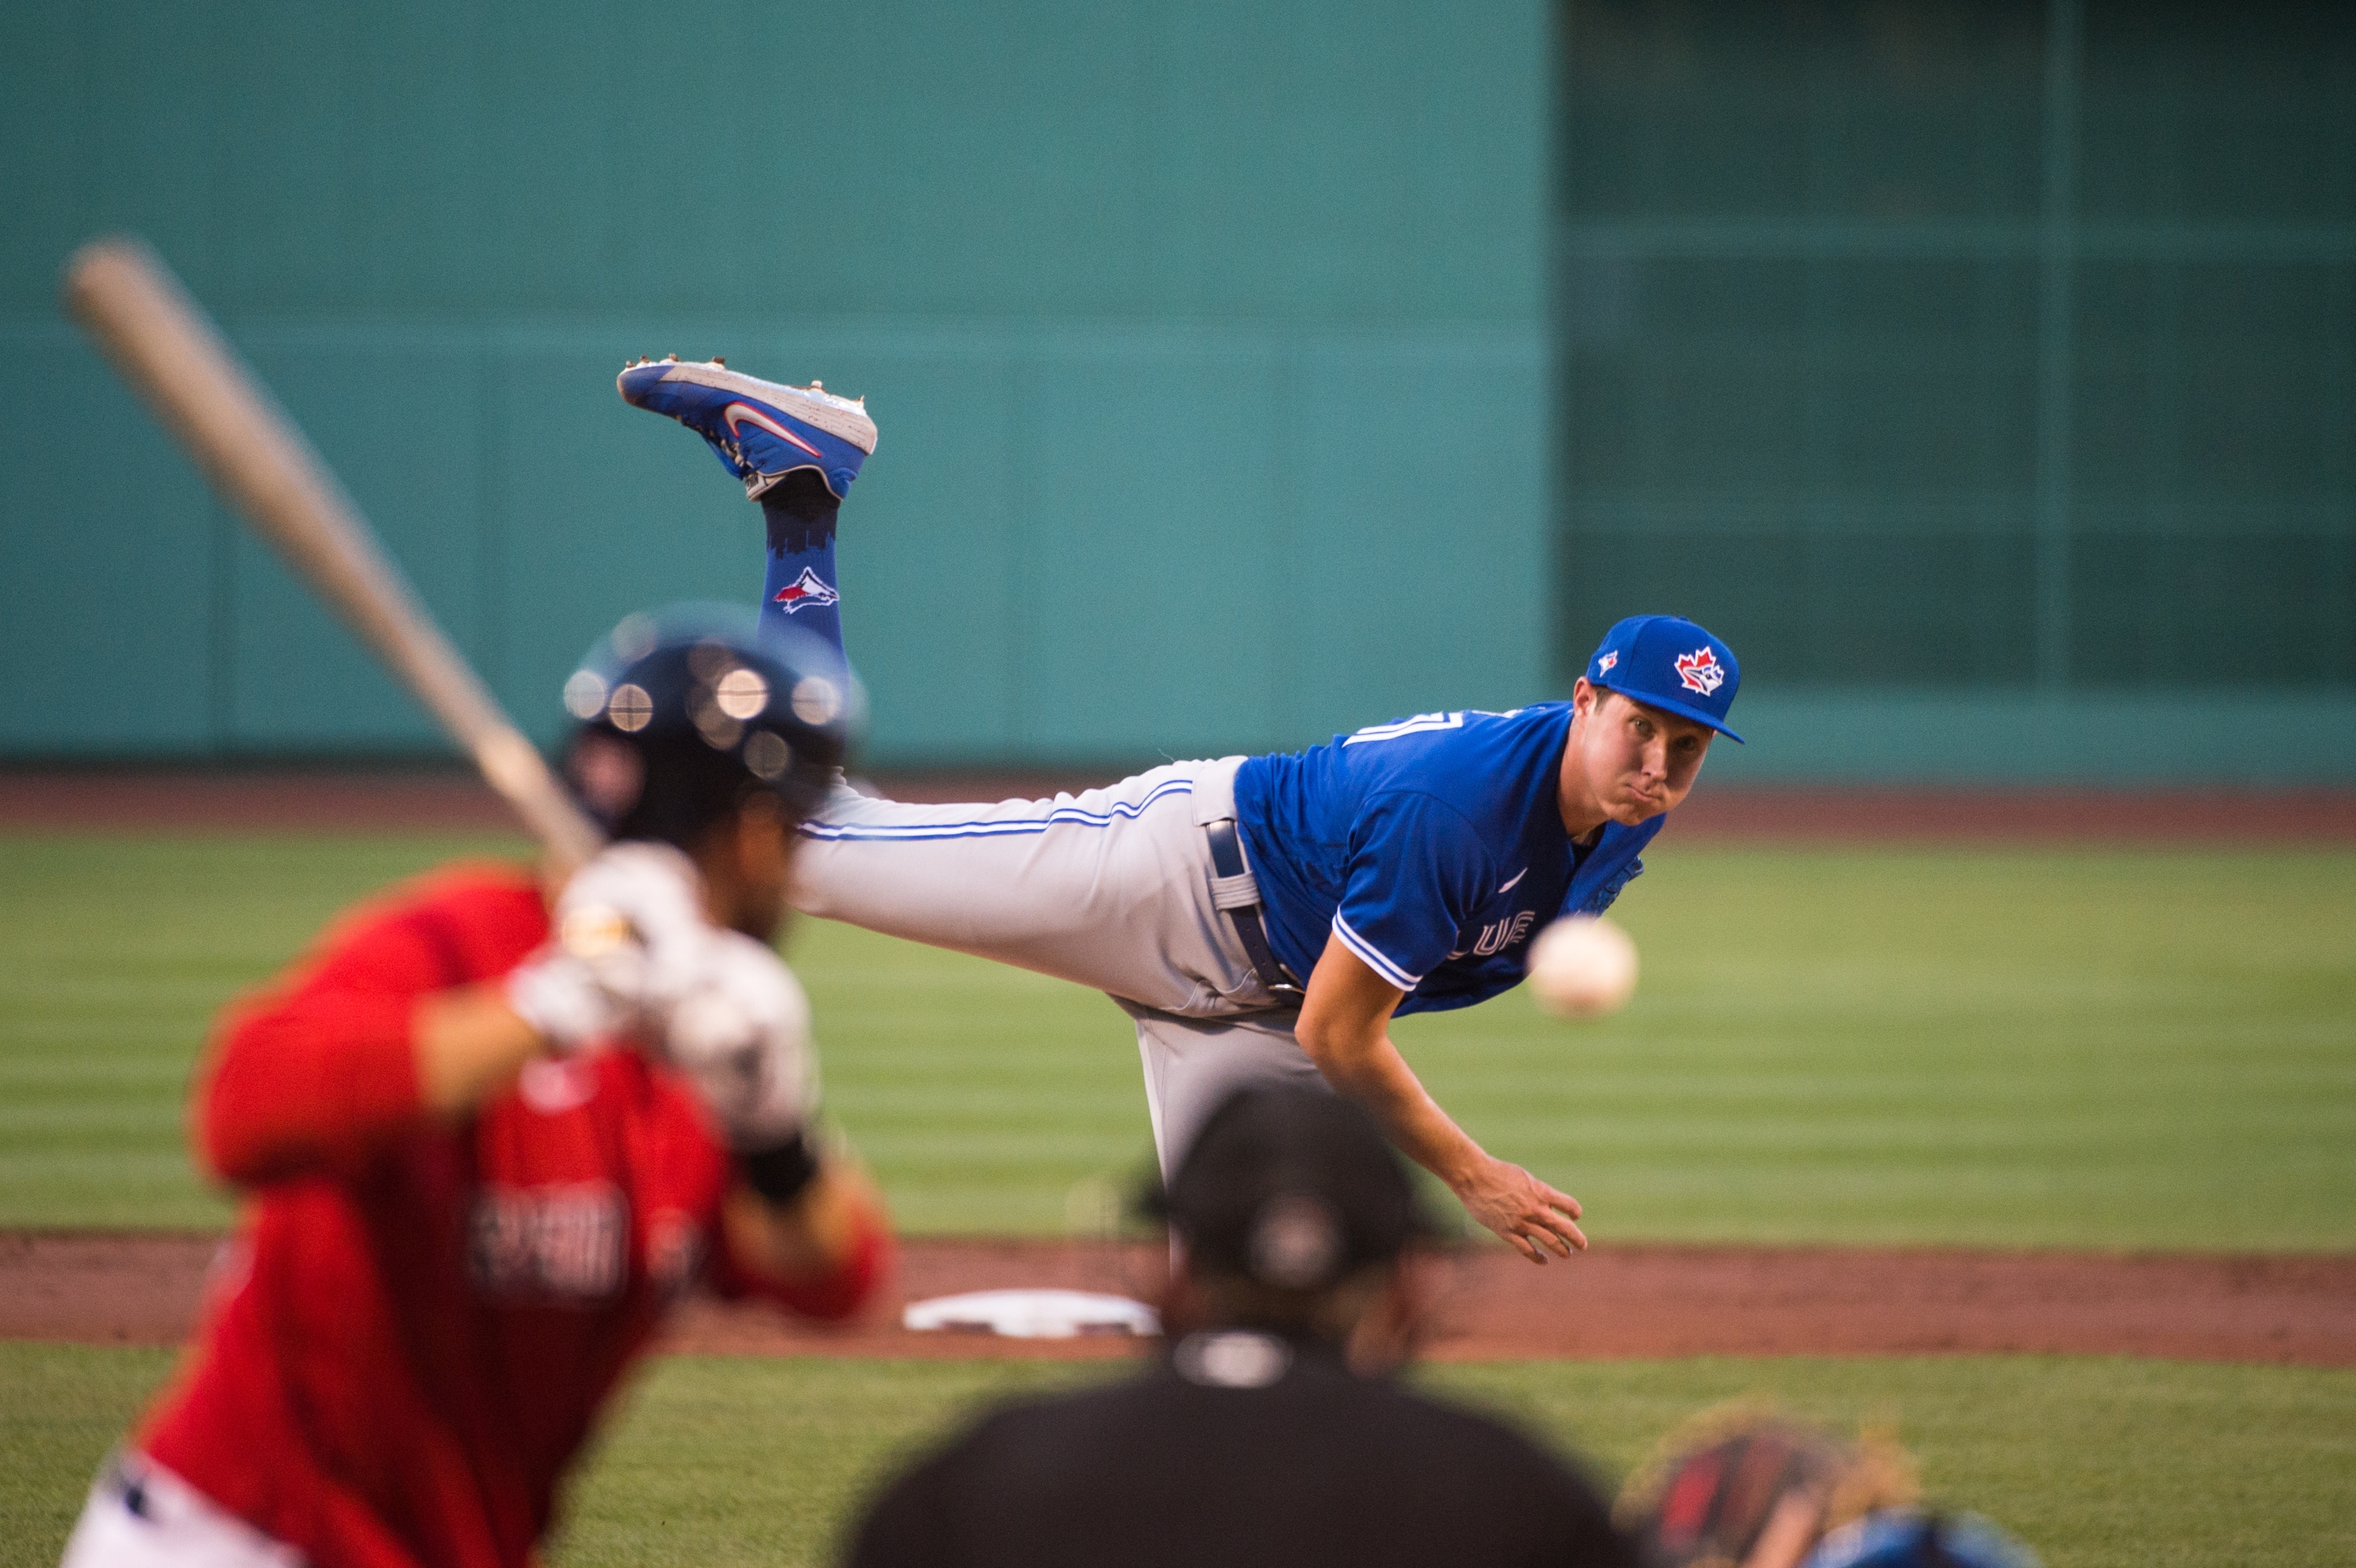 Nerves get to Pearson early but Blue Jays rookie shows flashes of